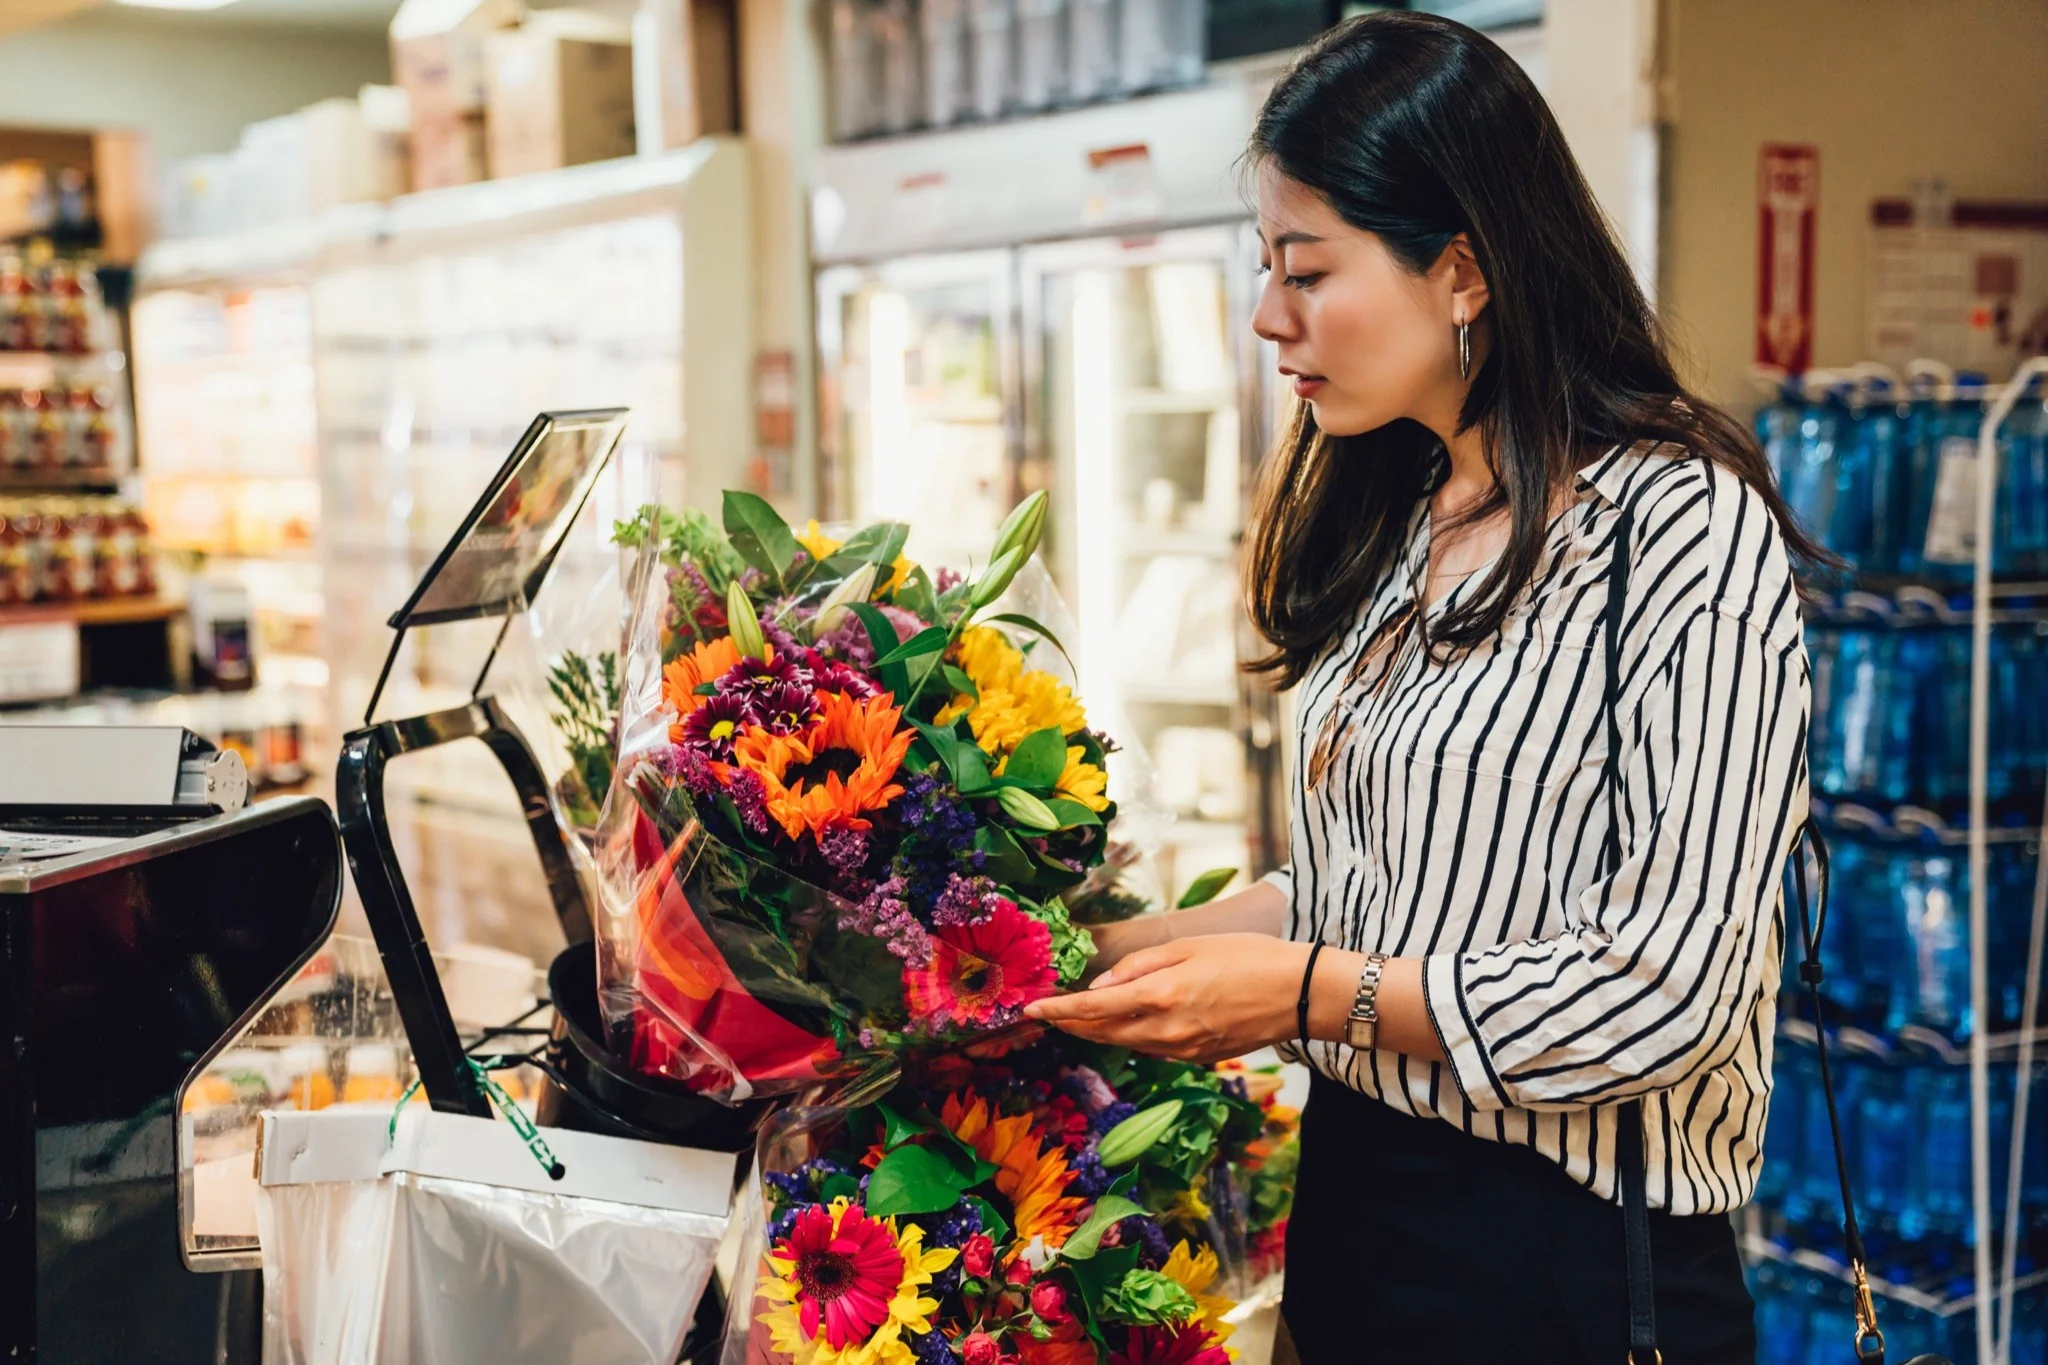 Where To Buy Flowers On A Budget